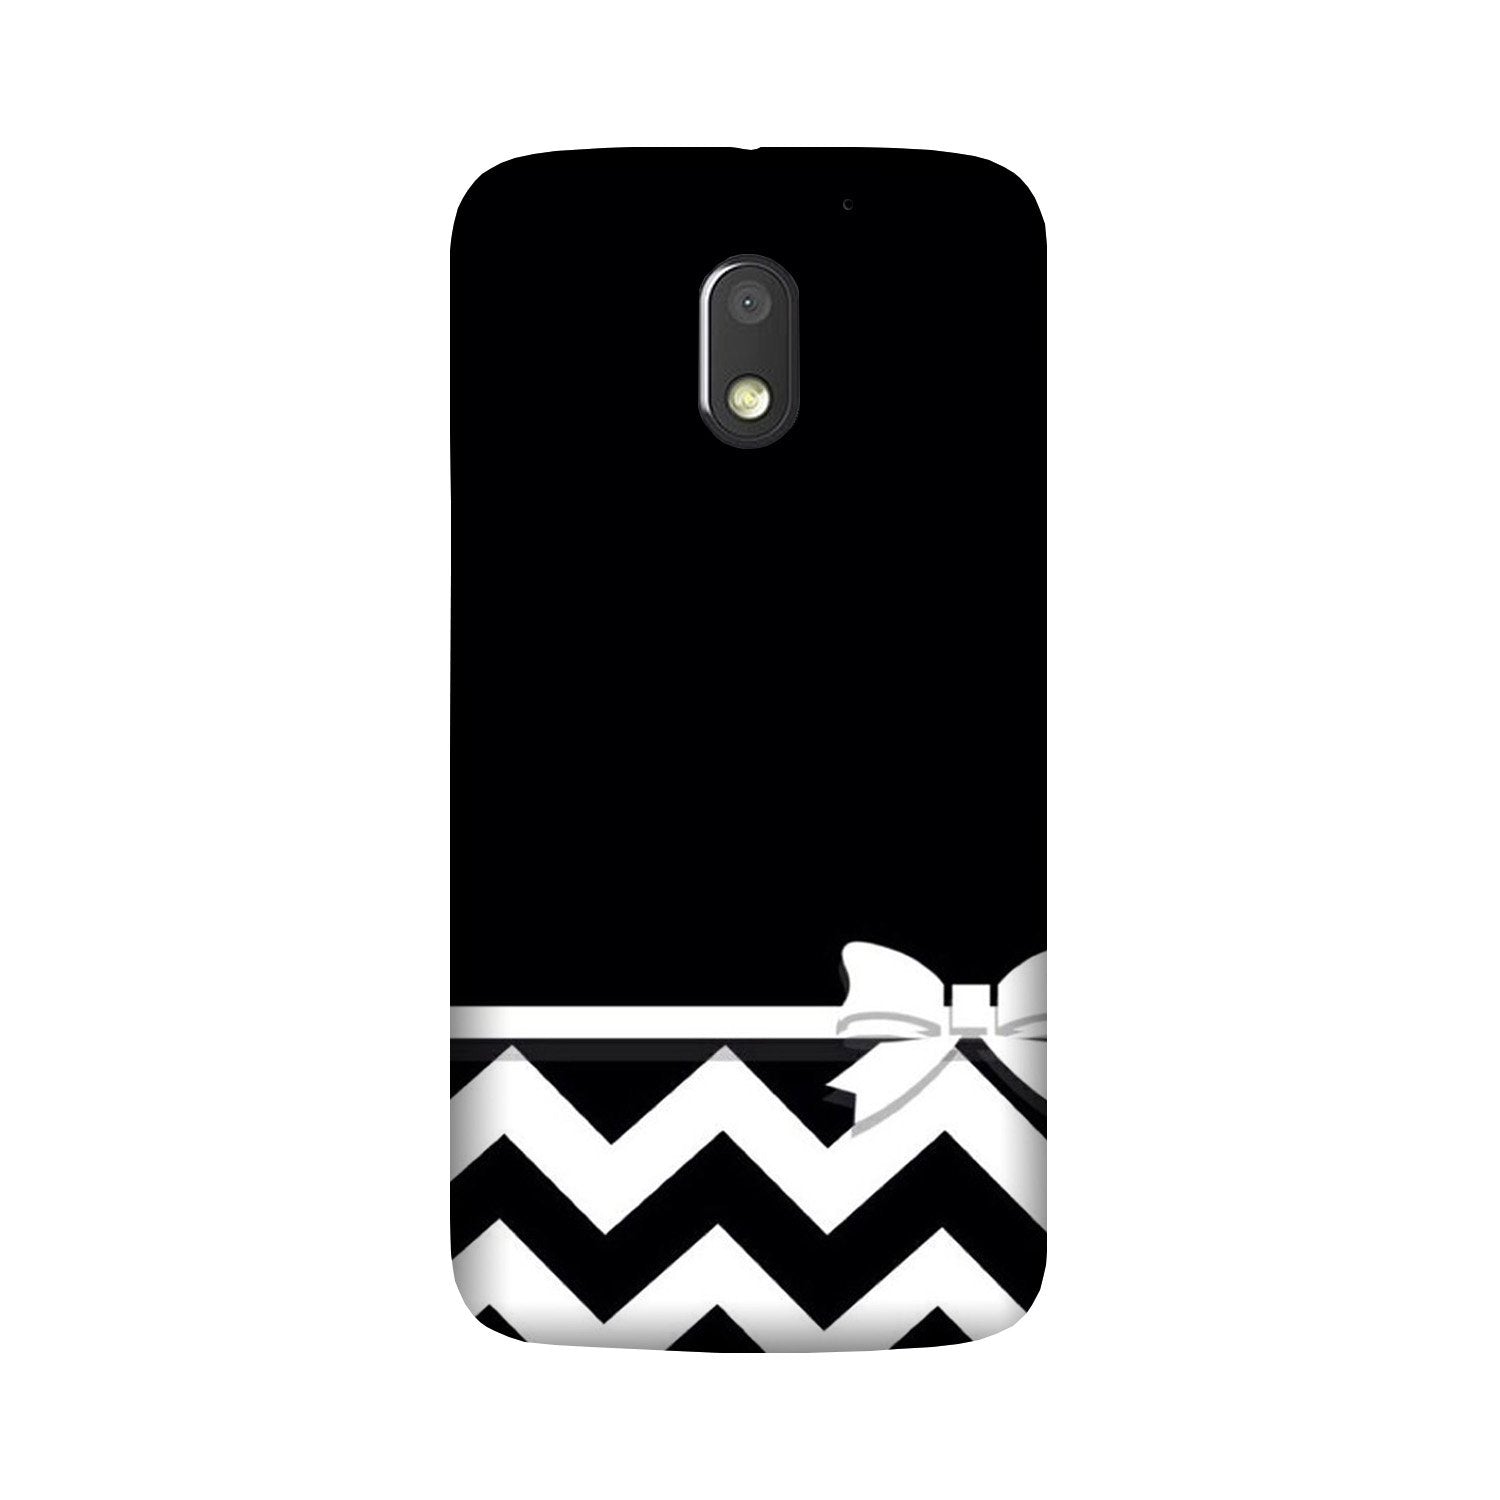 Gift Wrap7 Case for Moto G4 Play